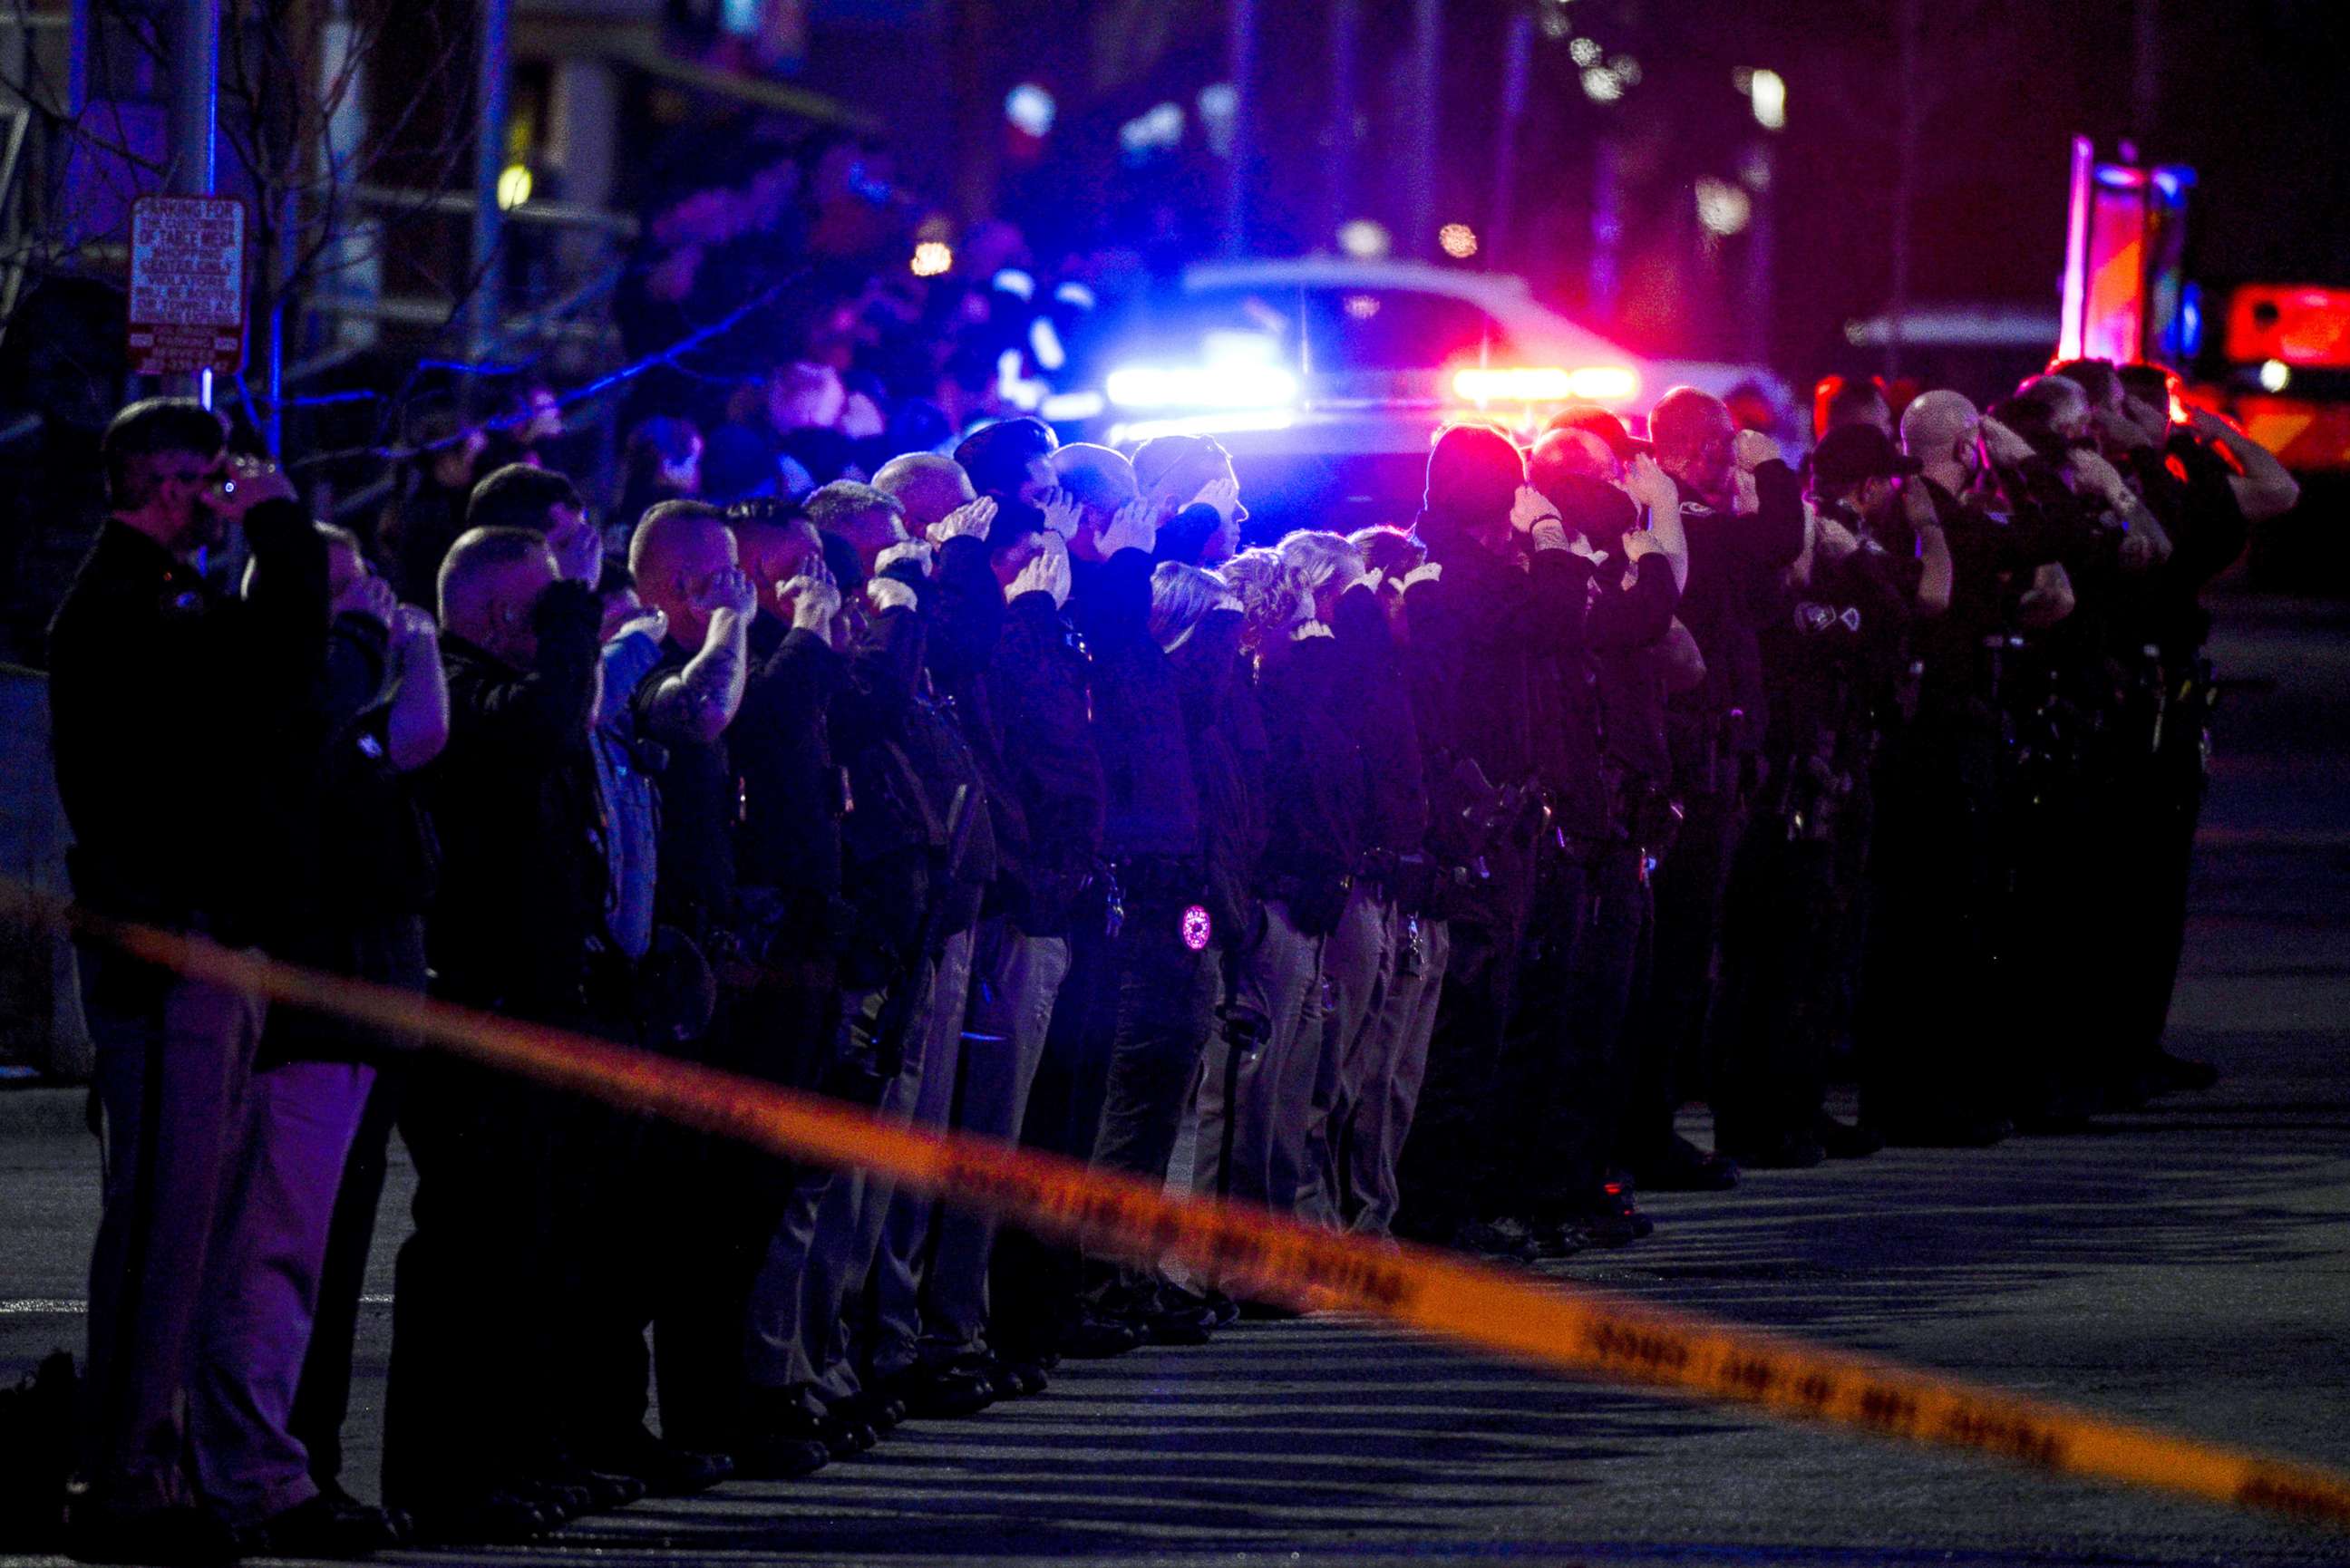 PHOTO: Law enforcement officers salute as emergency vehicles escort the body of slain police officer Eric Talley from the scene of a shooting at a King Soopers grocery store in Boulder, Colo., March 22. 2021.